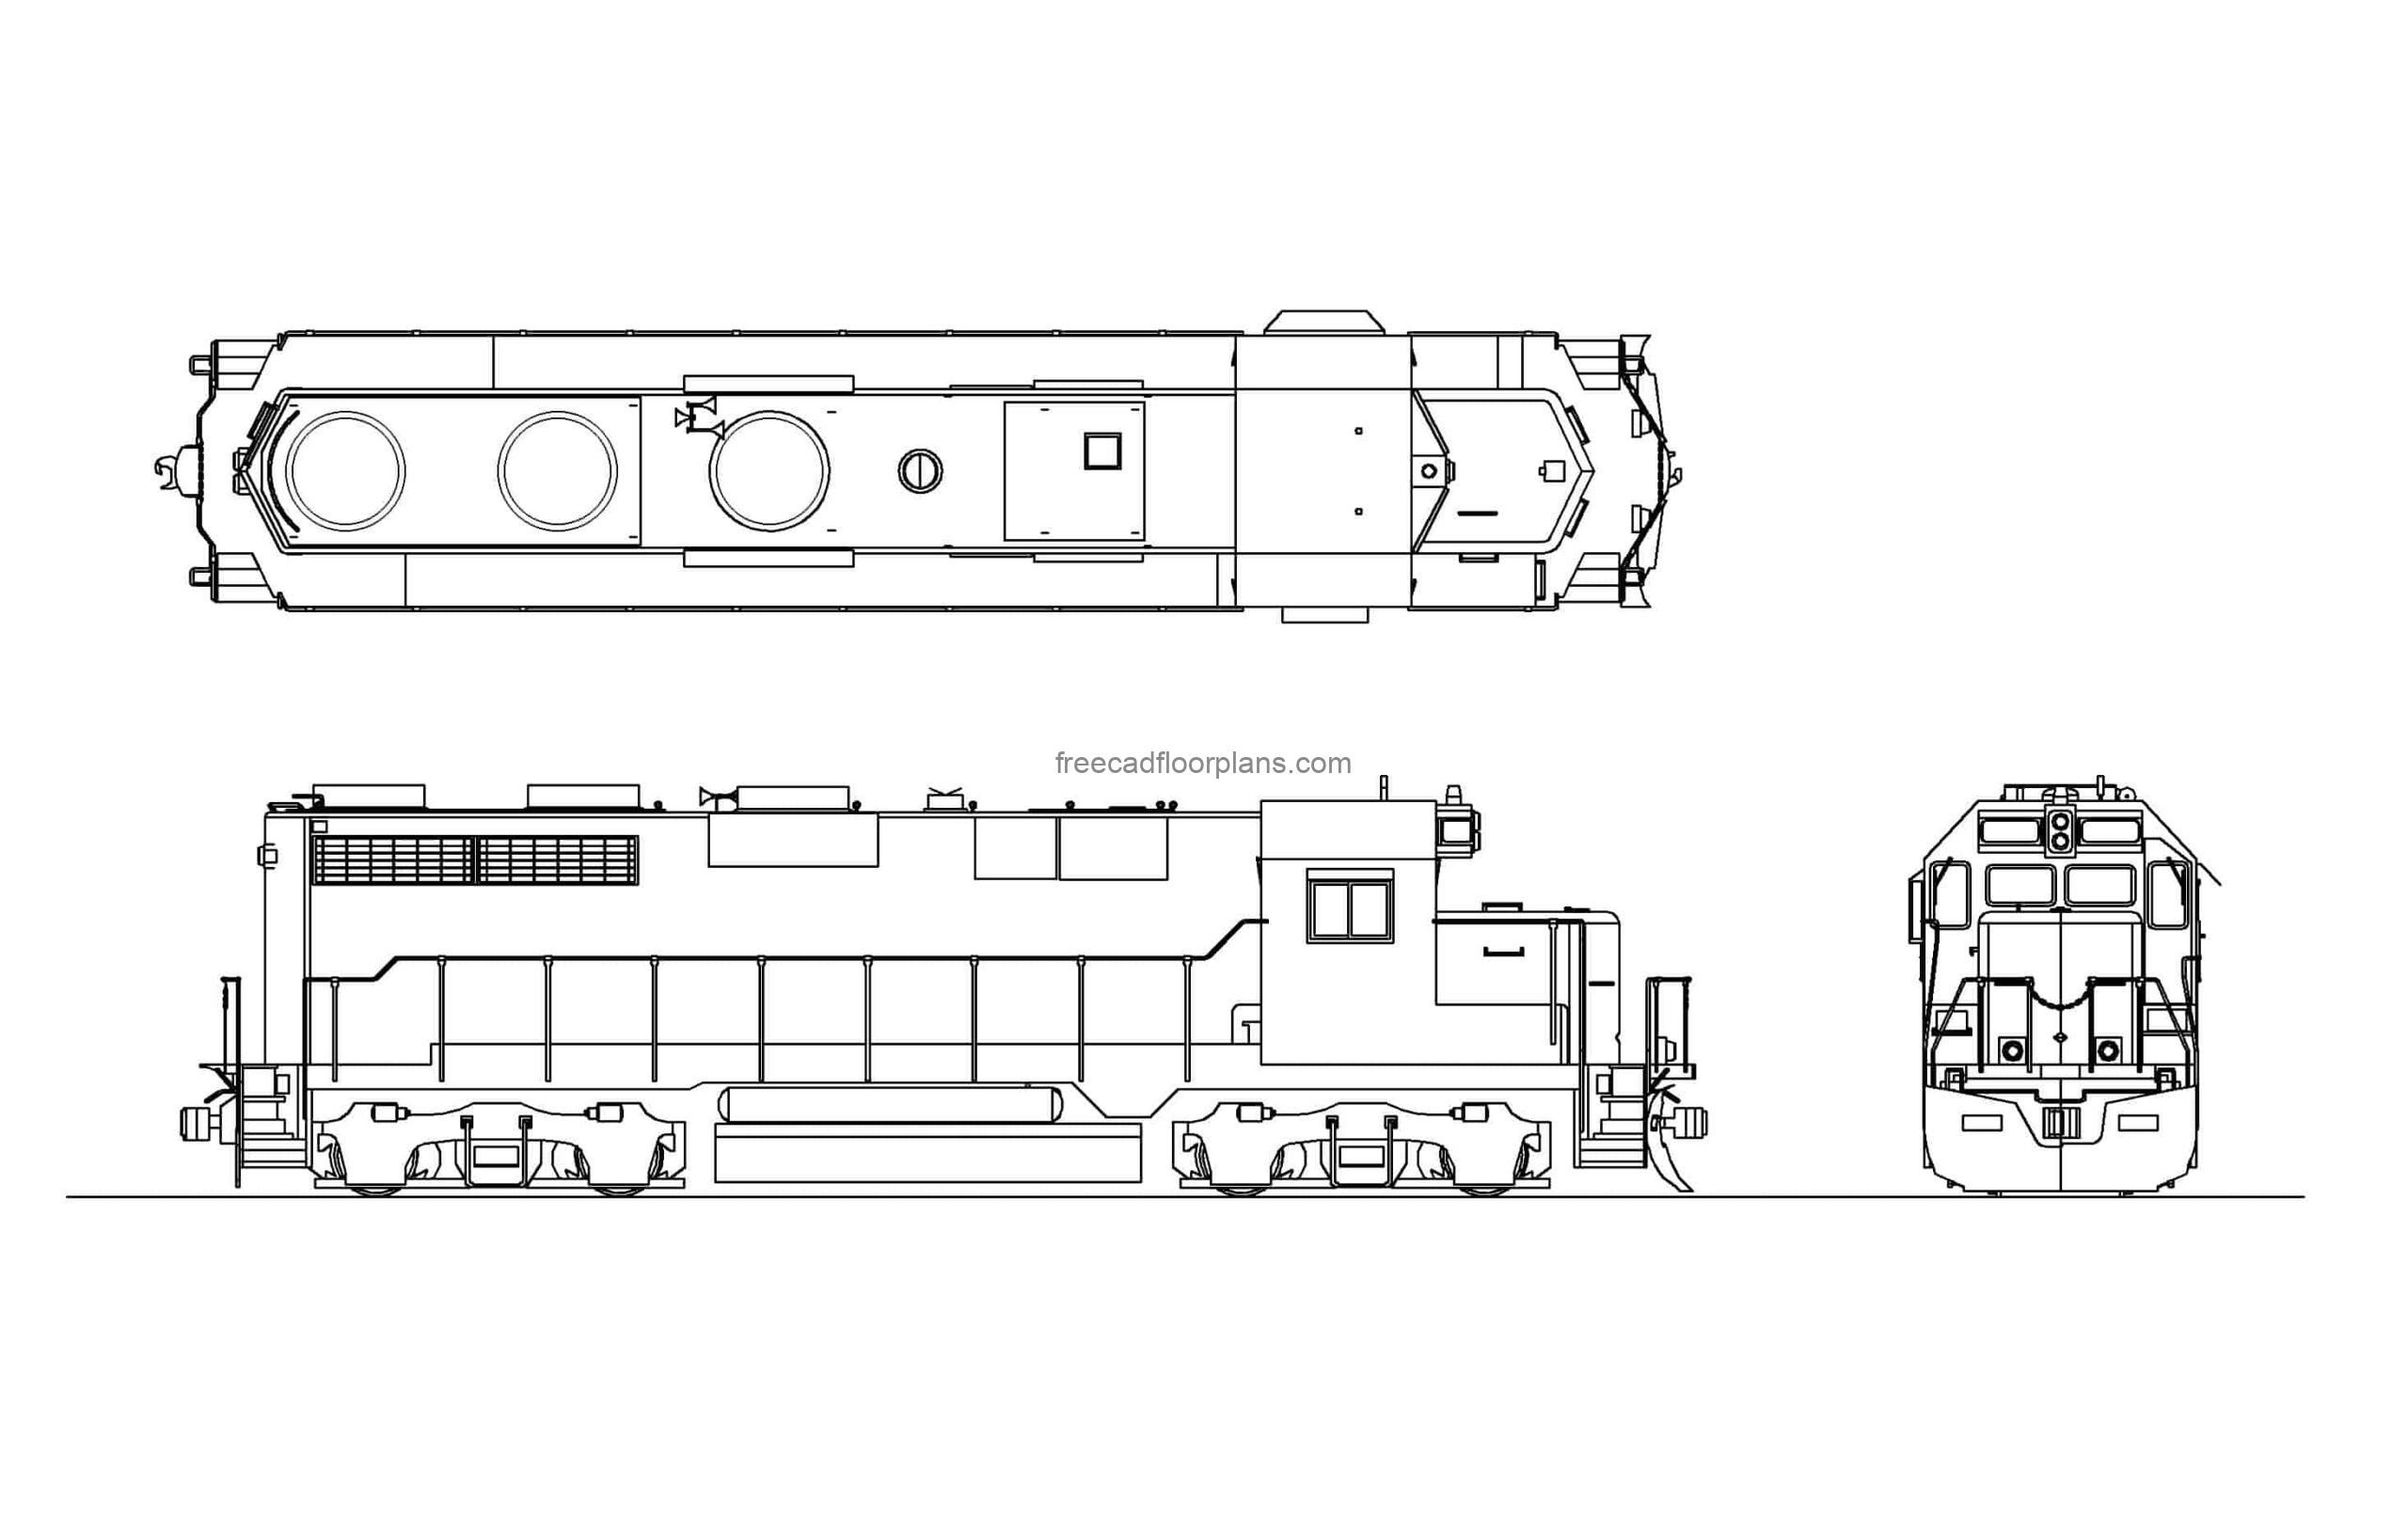 diesel locomotive autocad drawing, plan and elevations 2d views, dwg file for free download